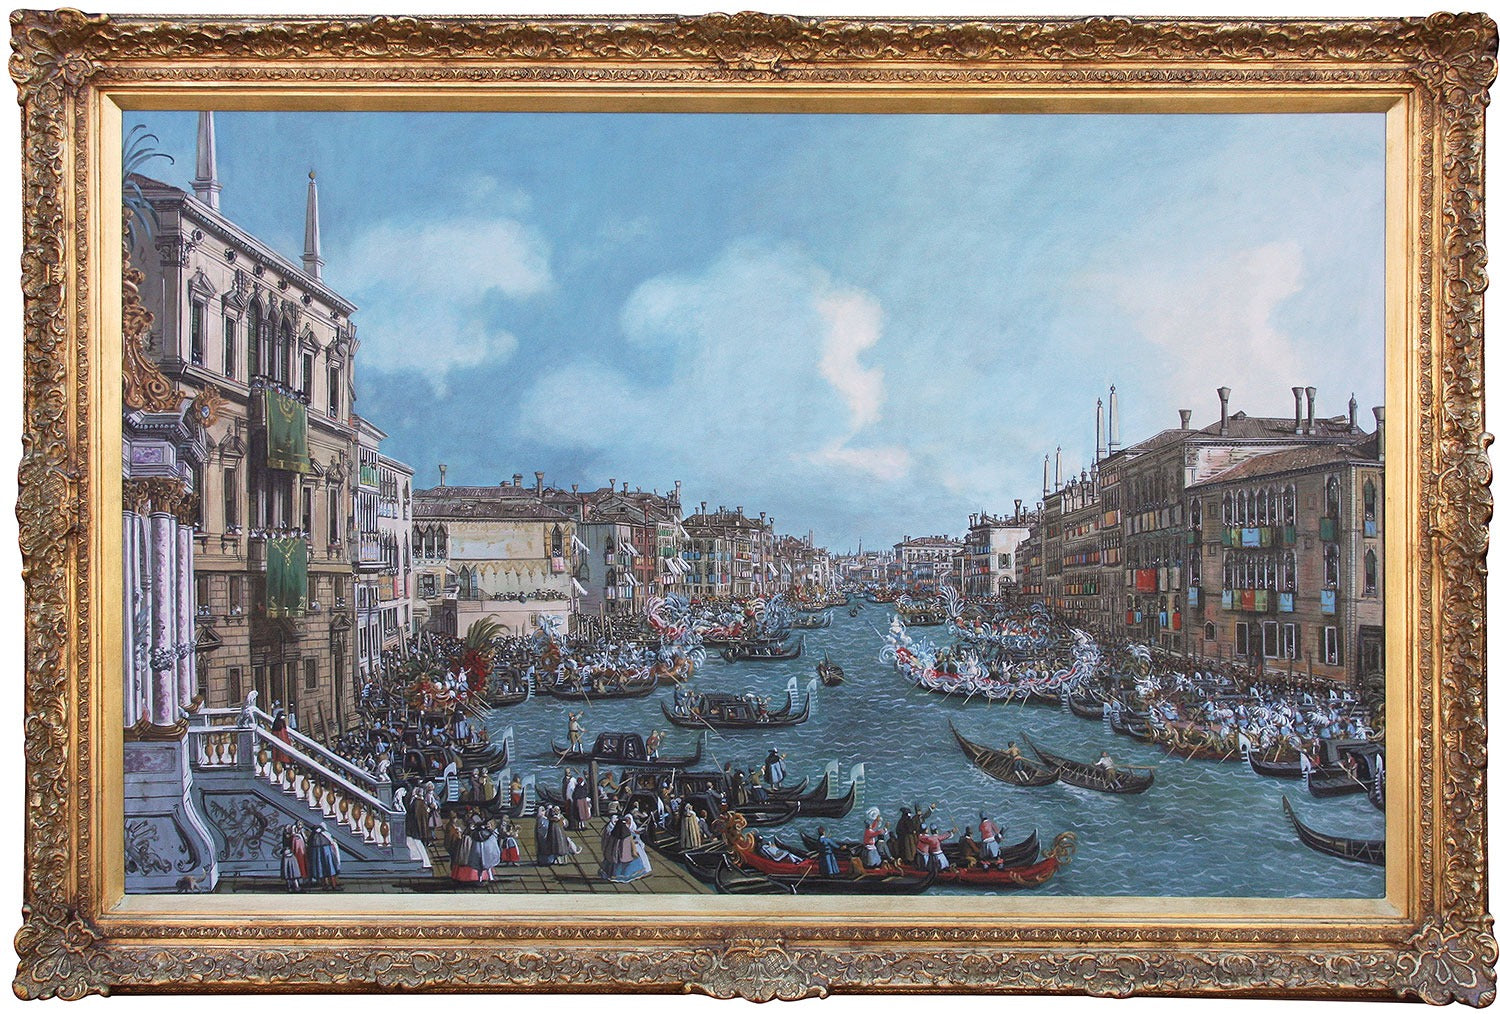 Oil Painting after 'A Regatta On The Grand Canal' in style of Canaletto